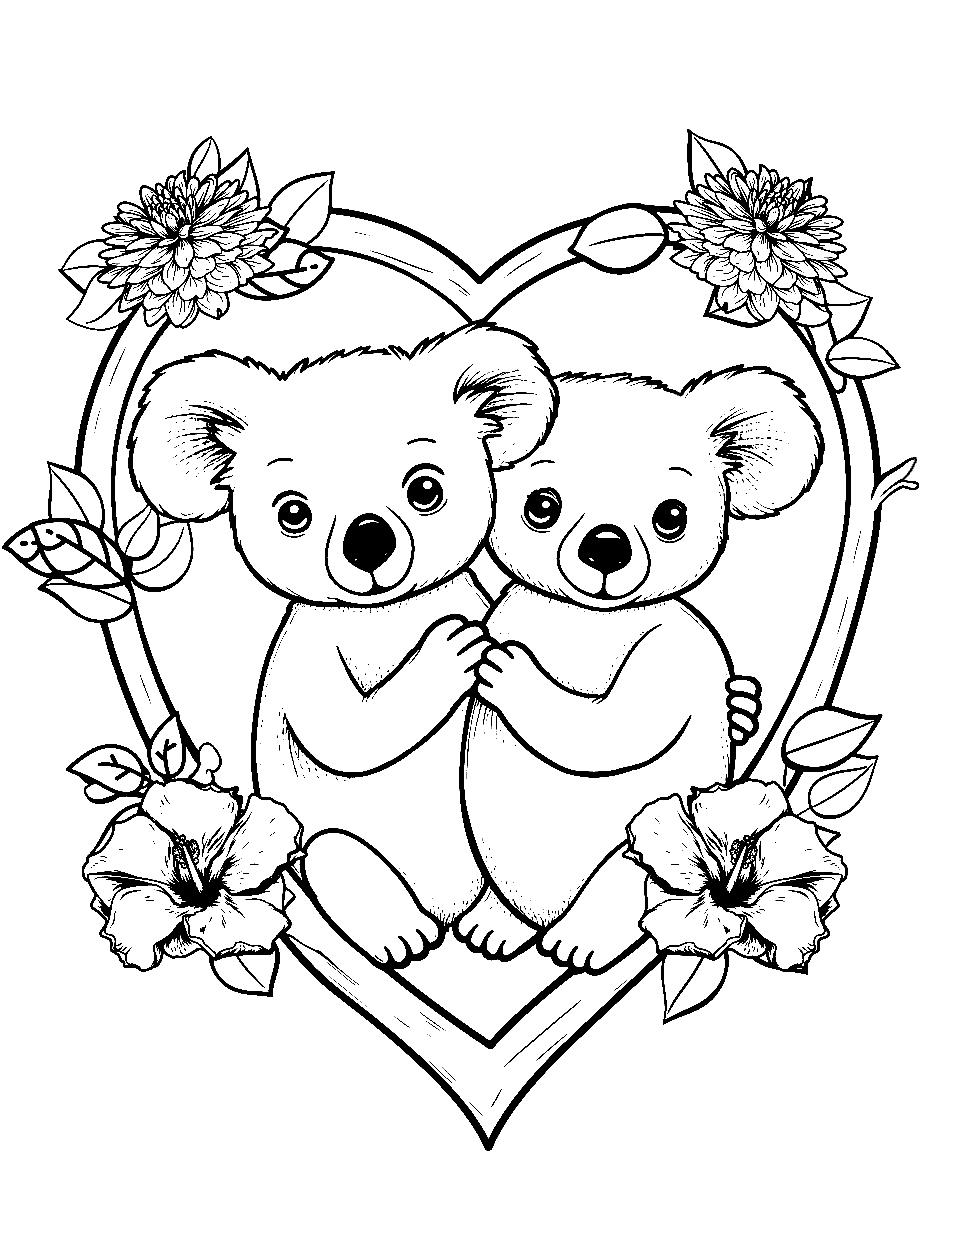 Loving Koala Couple Coloring Page - Two koalas sitting together with heart-shaped vines around them.